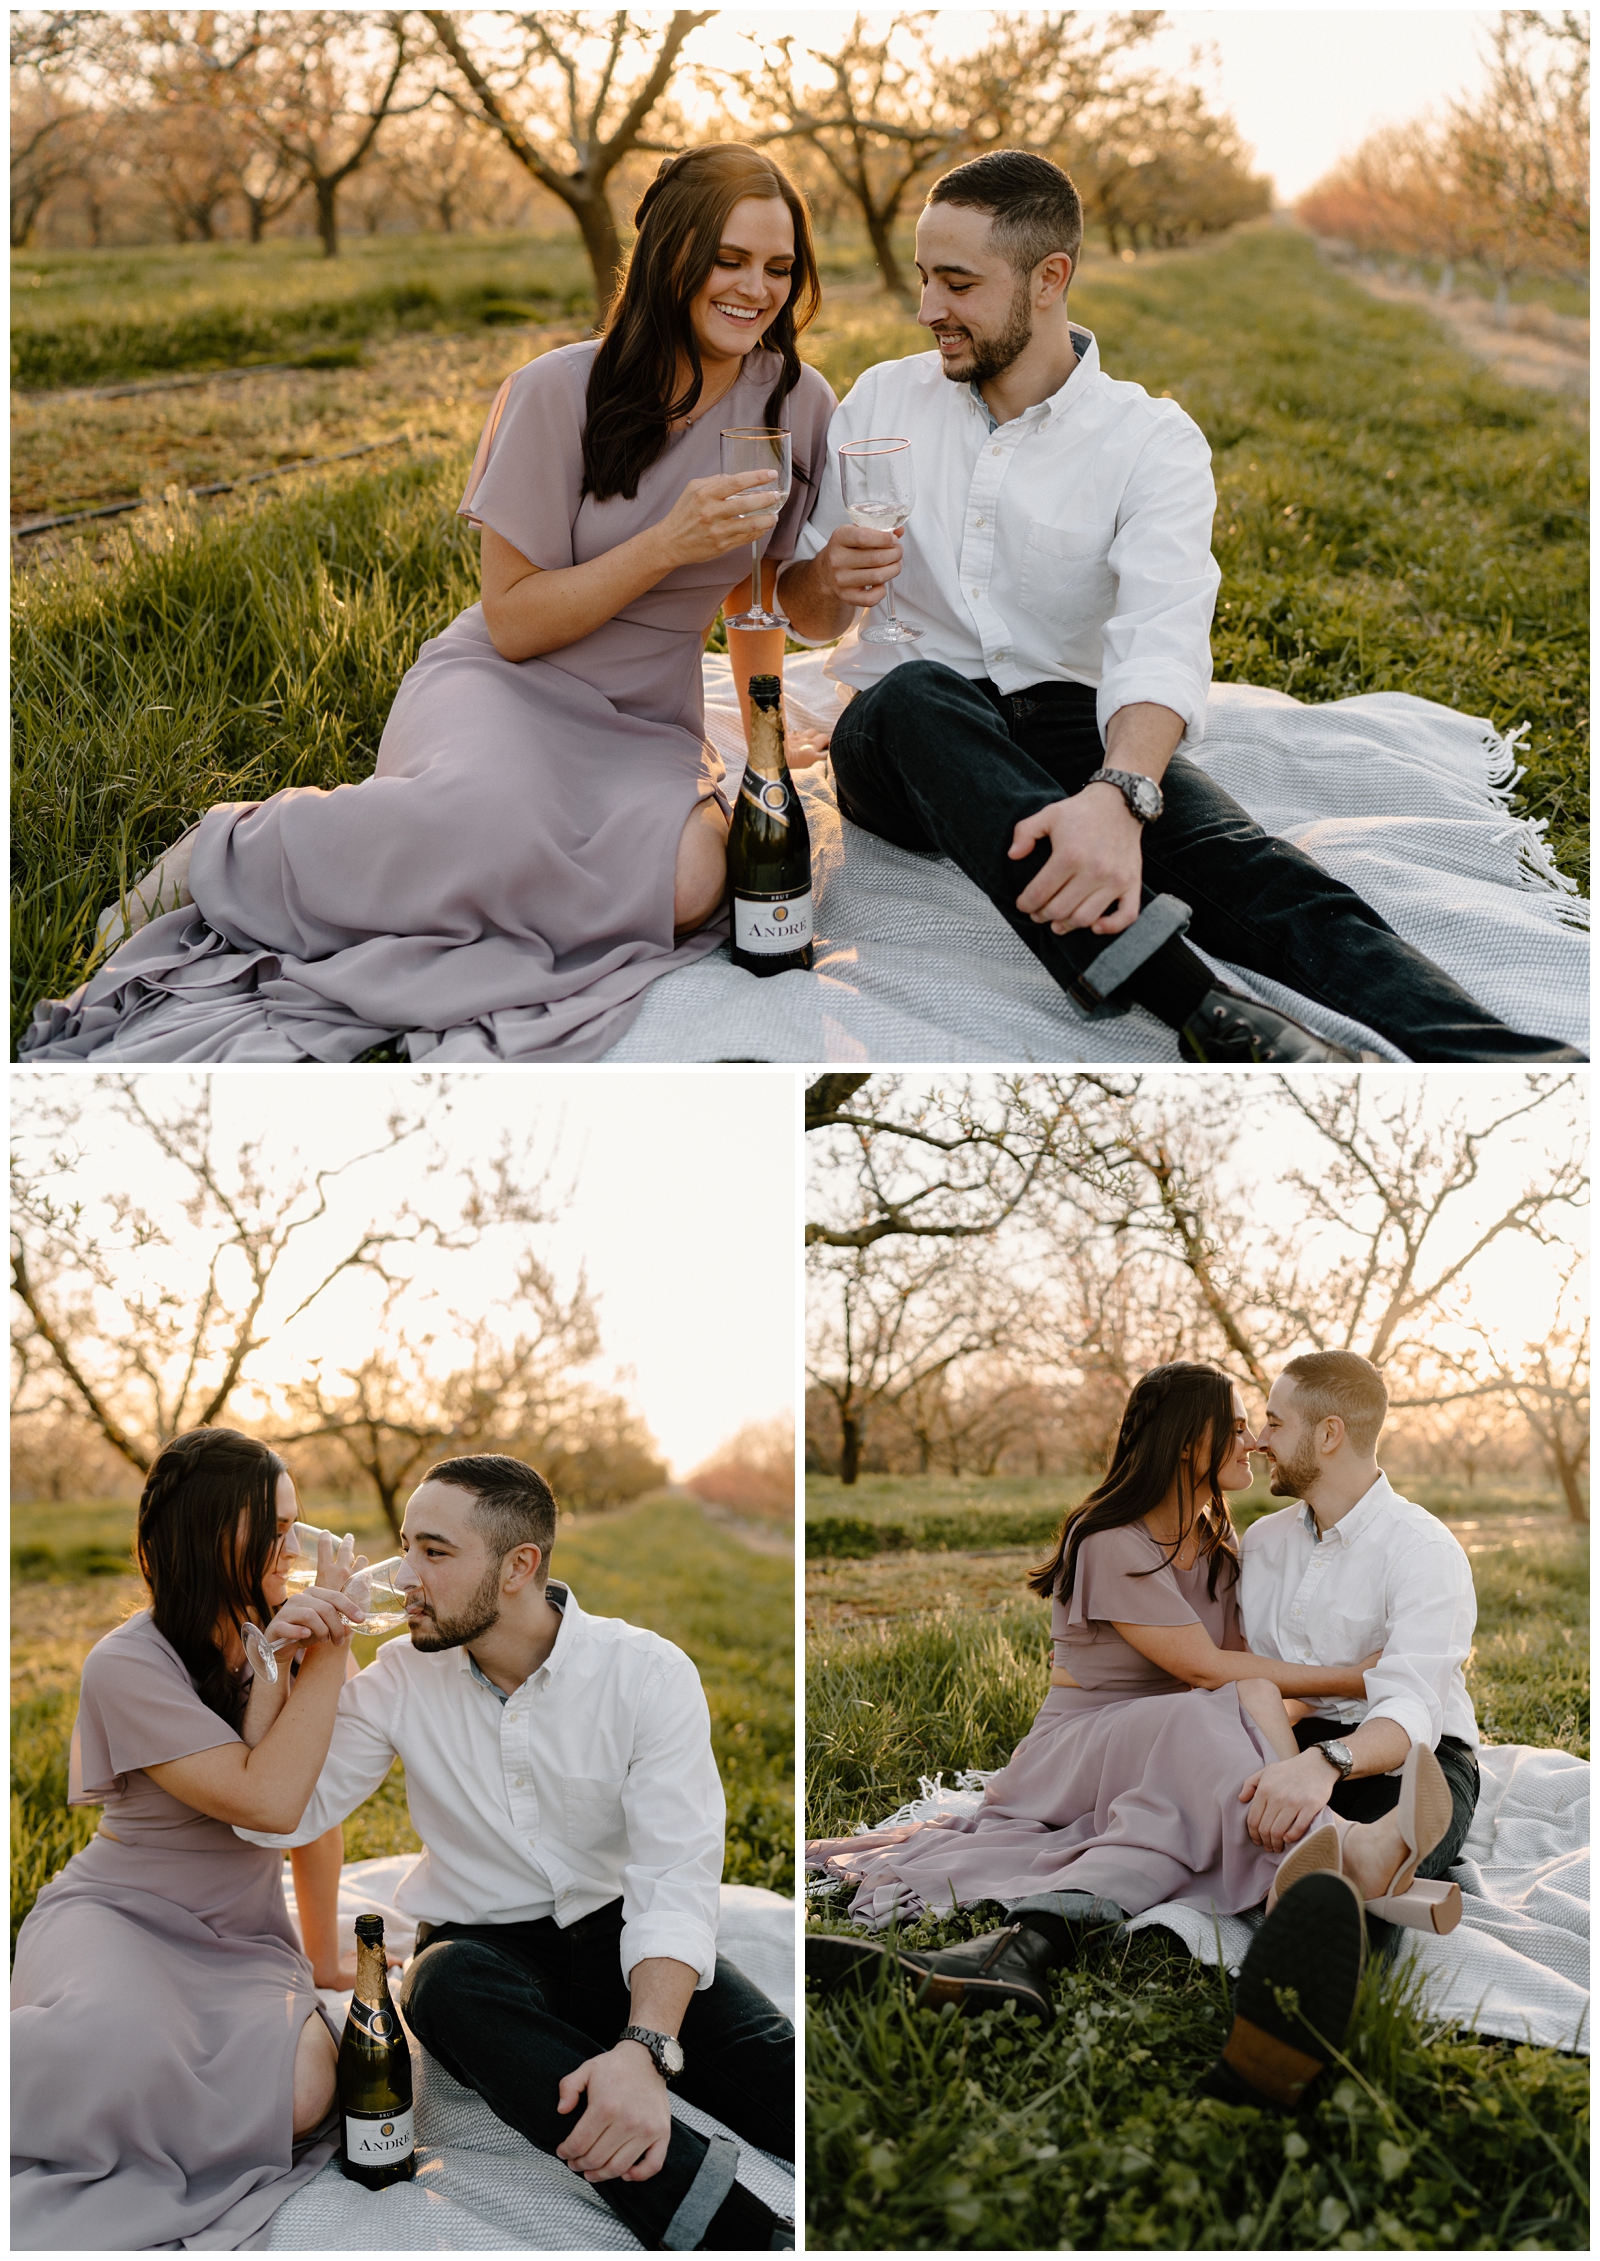 Fun North Carolina engagement session at Sweet Bee Orchard's cherry blossoms by NC wedding photographer